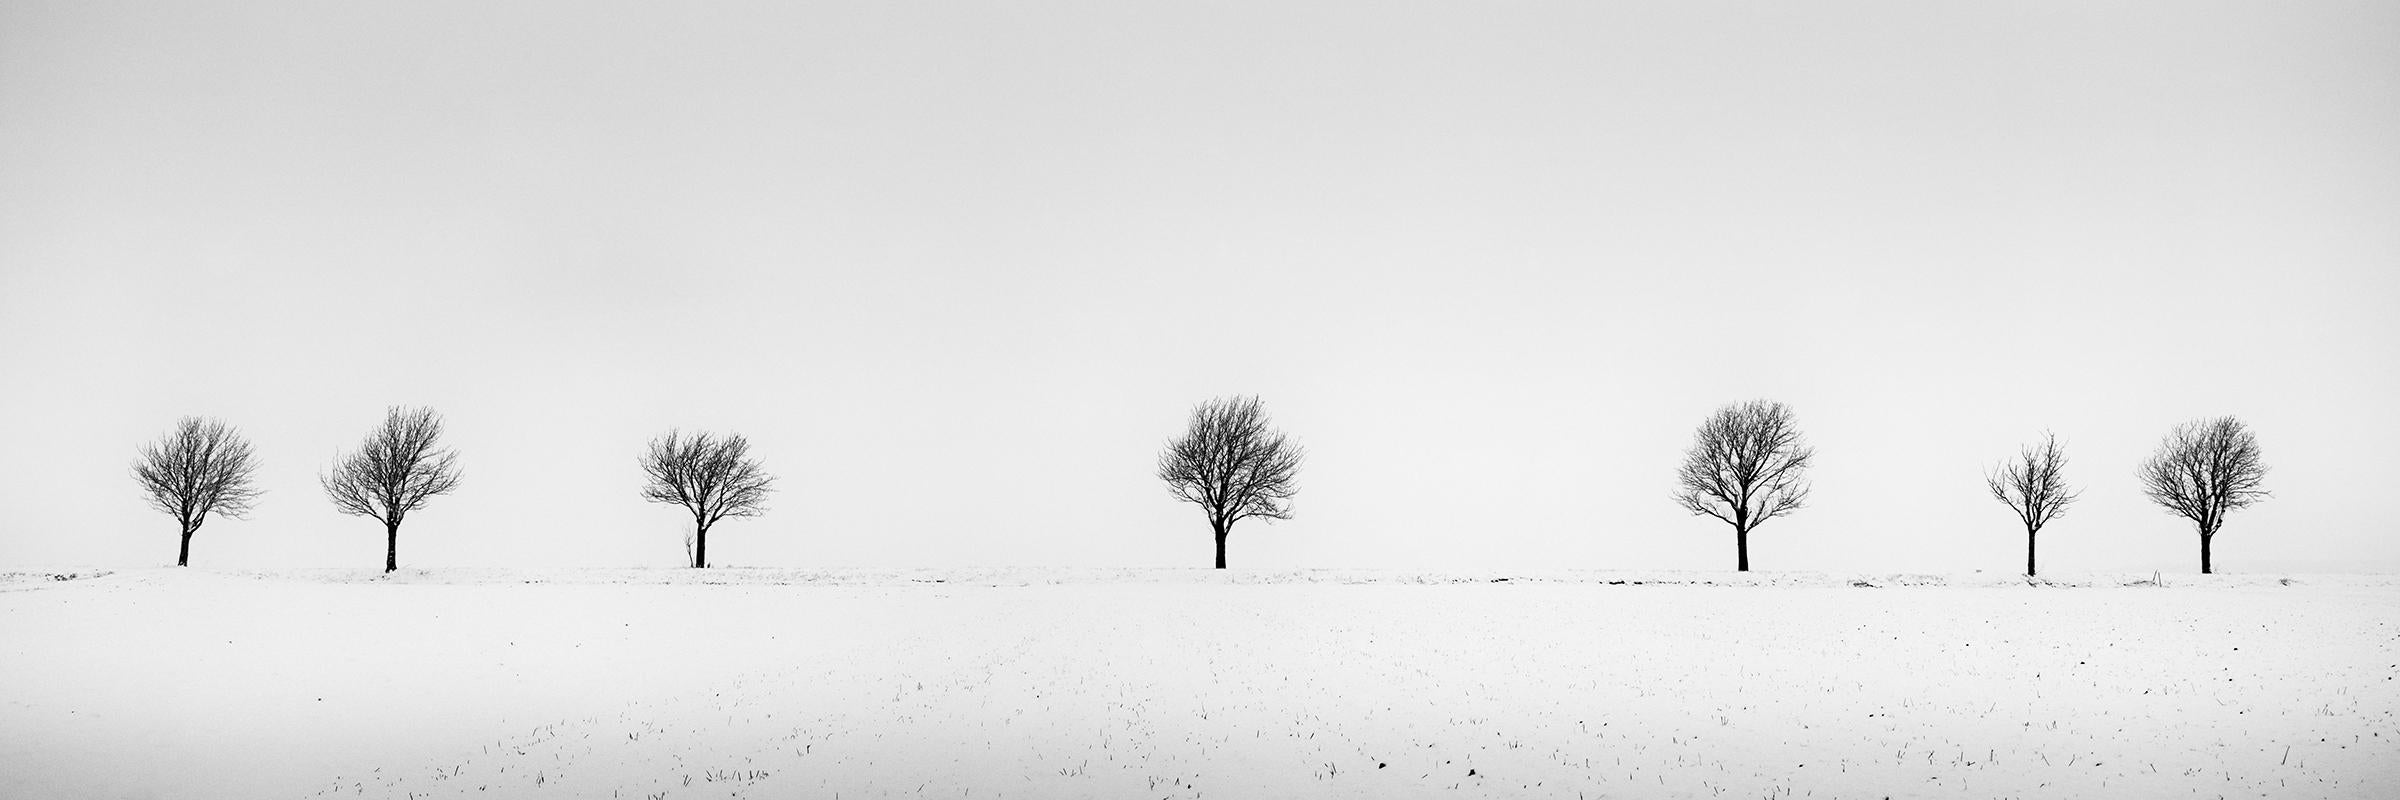 Gerald Berghammer Landscape Photograph - Cherry Trees in Snow Field, Panorama, black and white photography, landscape